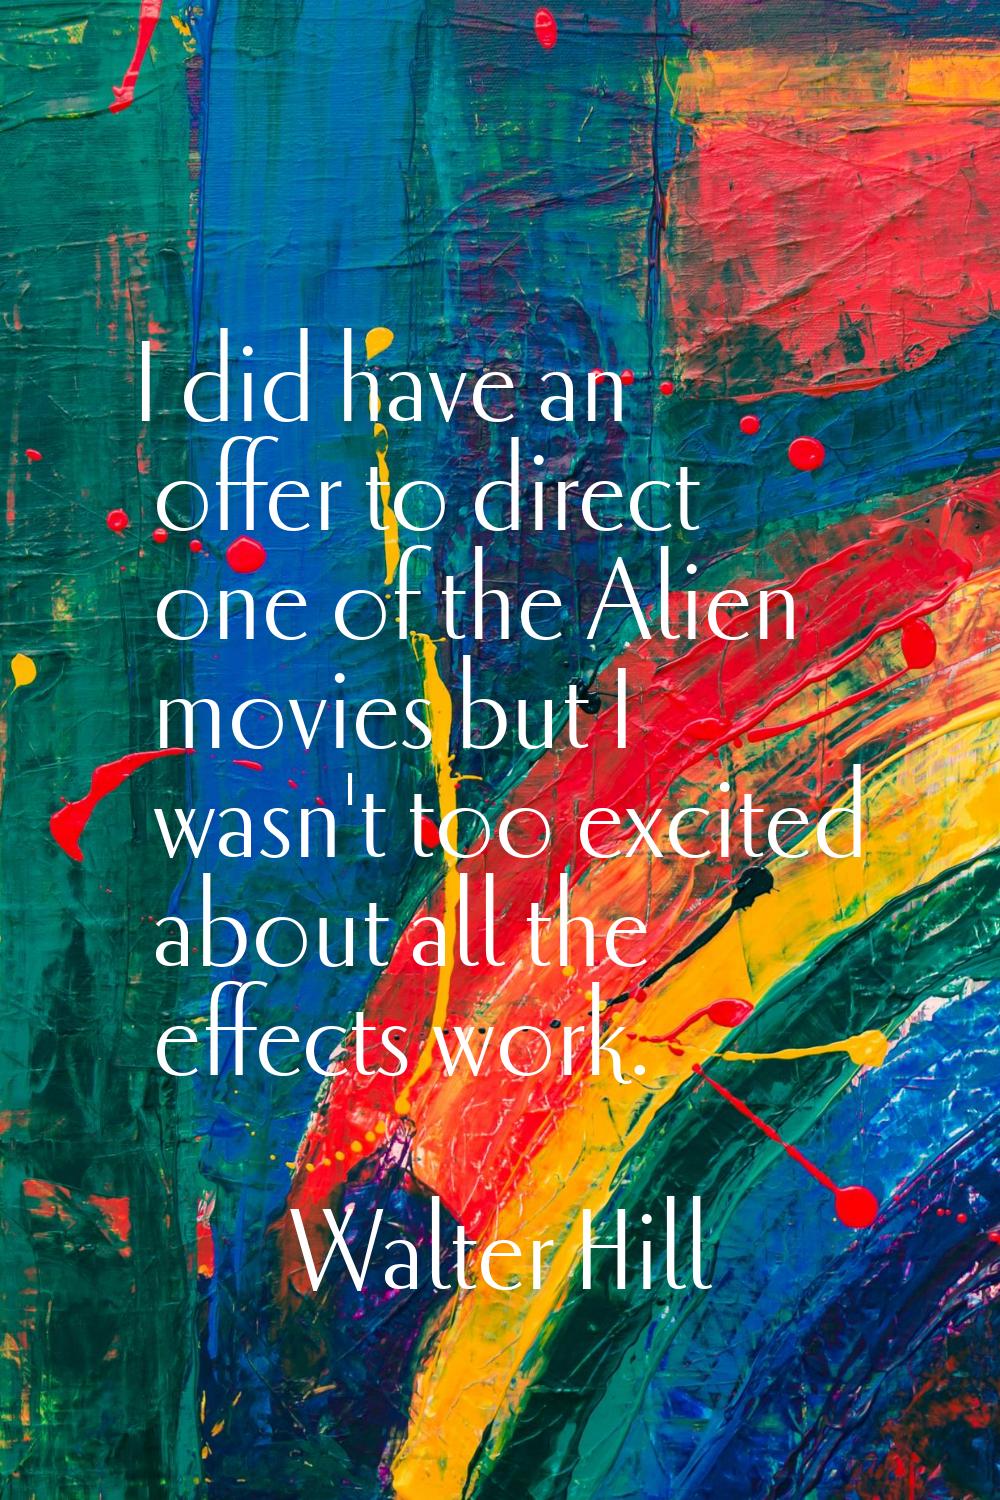 I did have an offer to direct one of the Alien movies but I wasn't too excited about all the effect